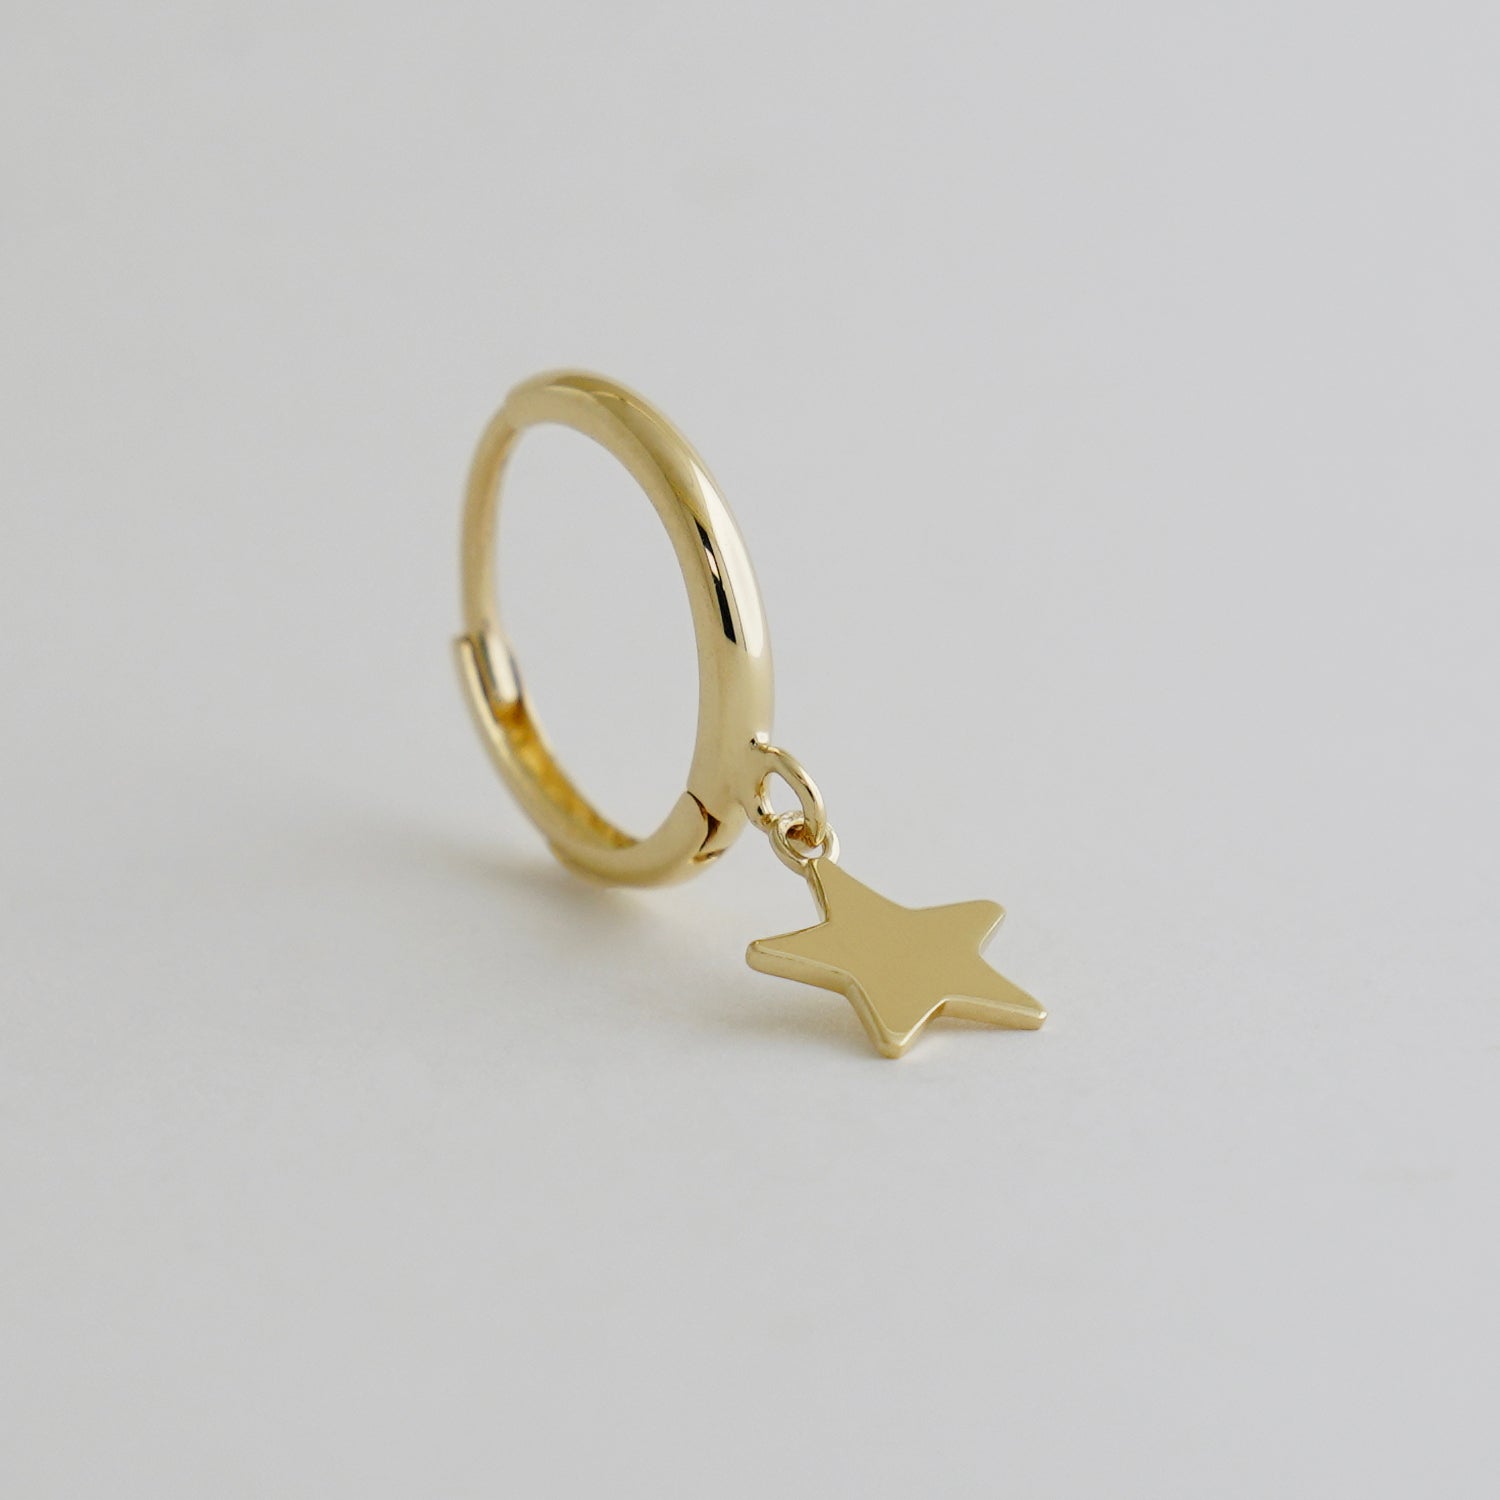 14K Solid Gold Star Drop Huggie Earrings - anygolds